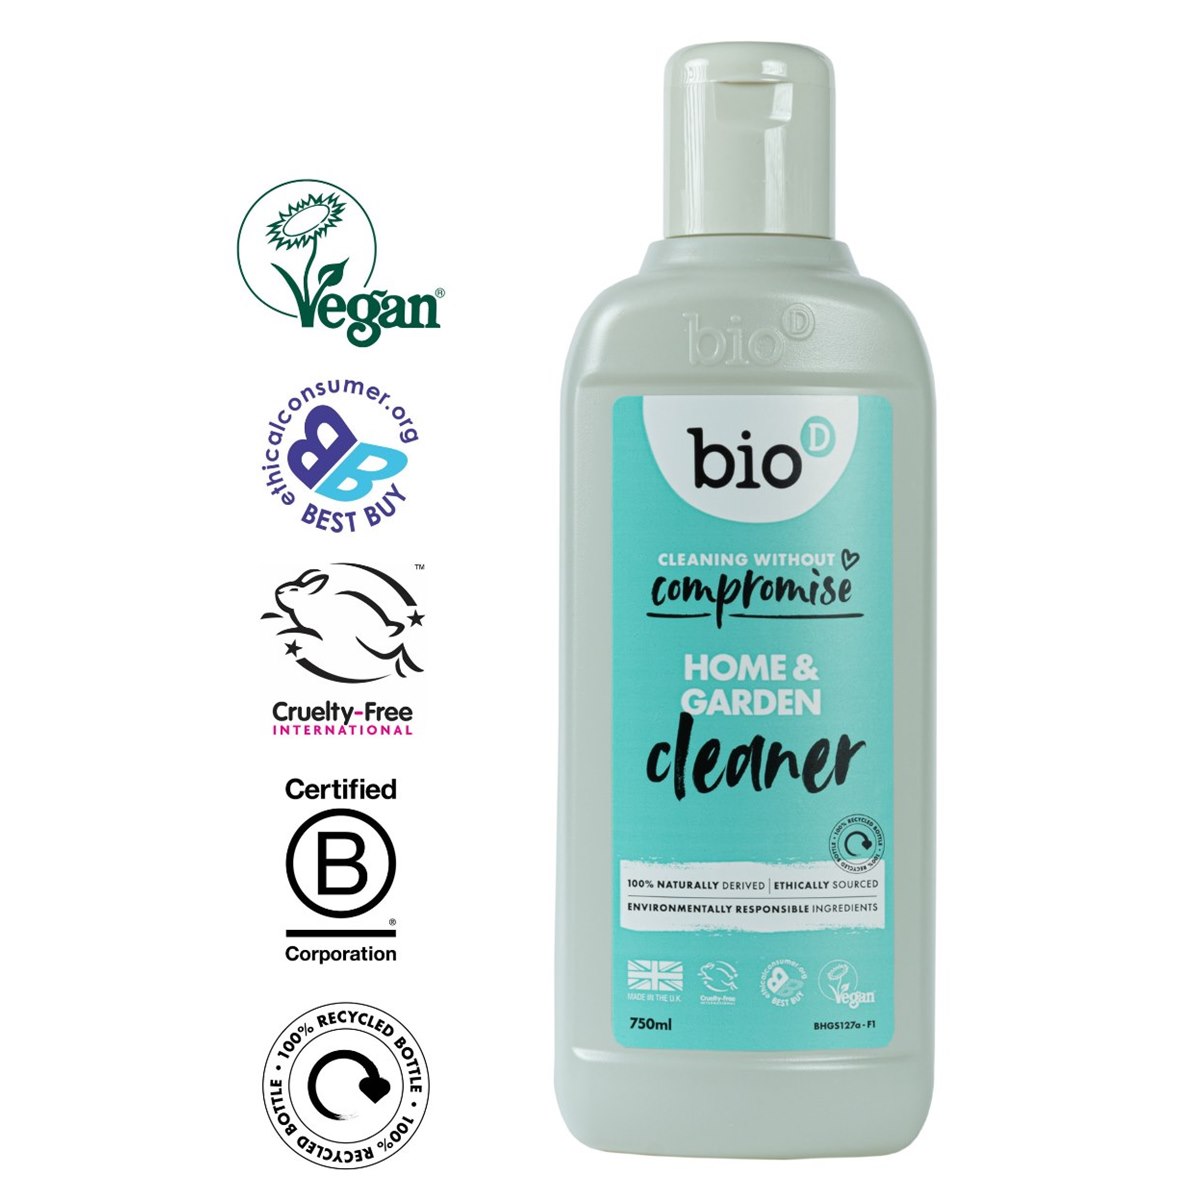 Bio-D home and garden cleaner